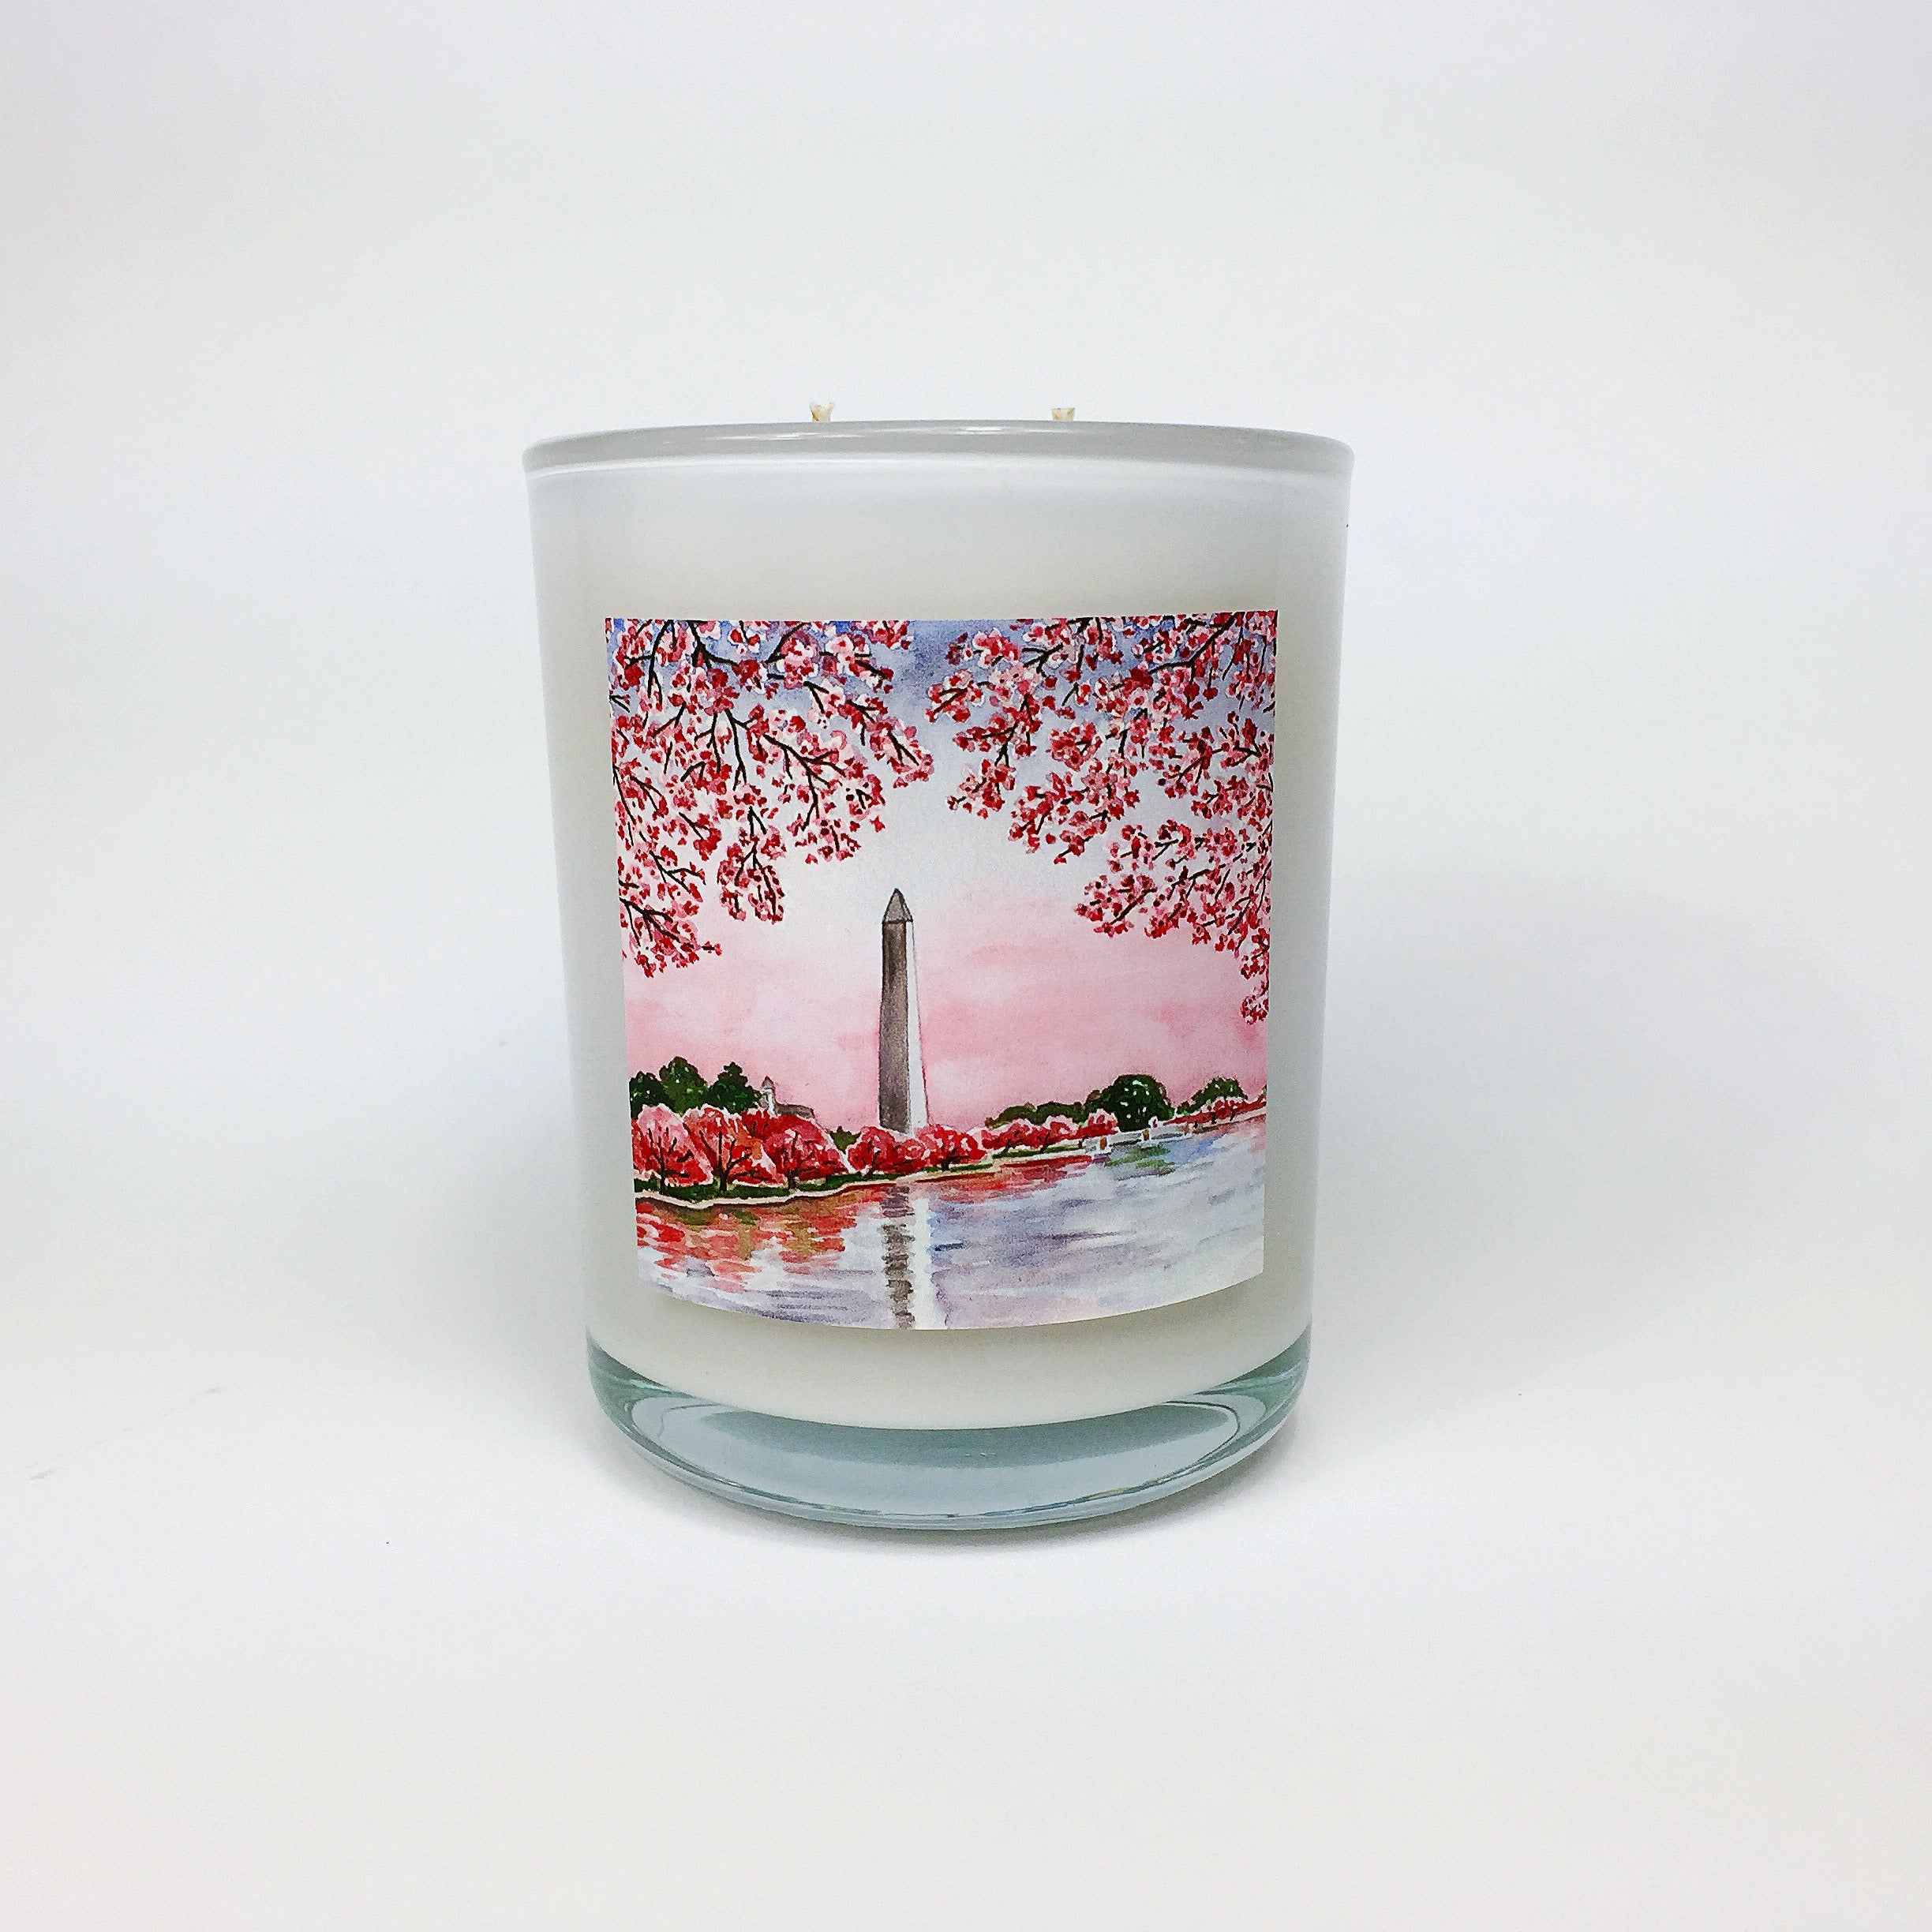 CHERRY BLOSSOM FESTIVAL. Japanese Cherry Blossom Coconut Wax Blend Candle.